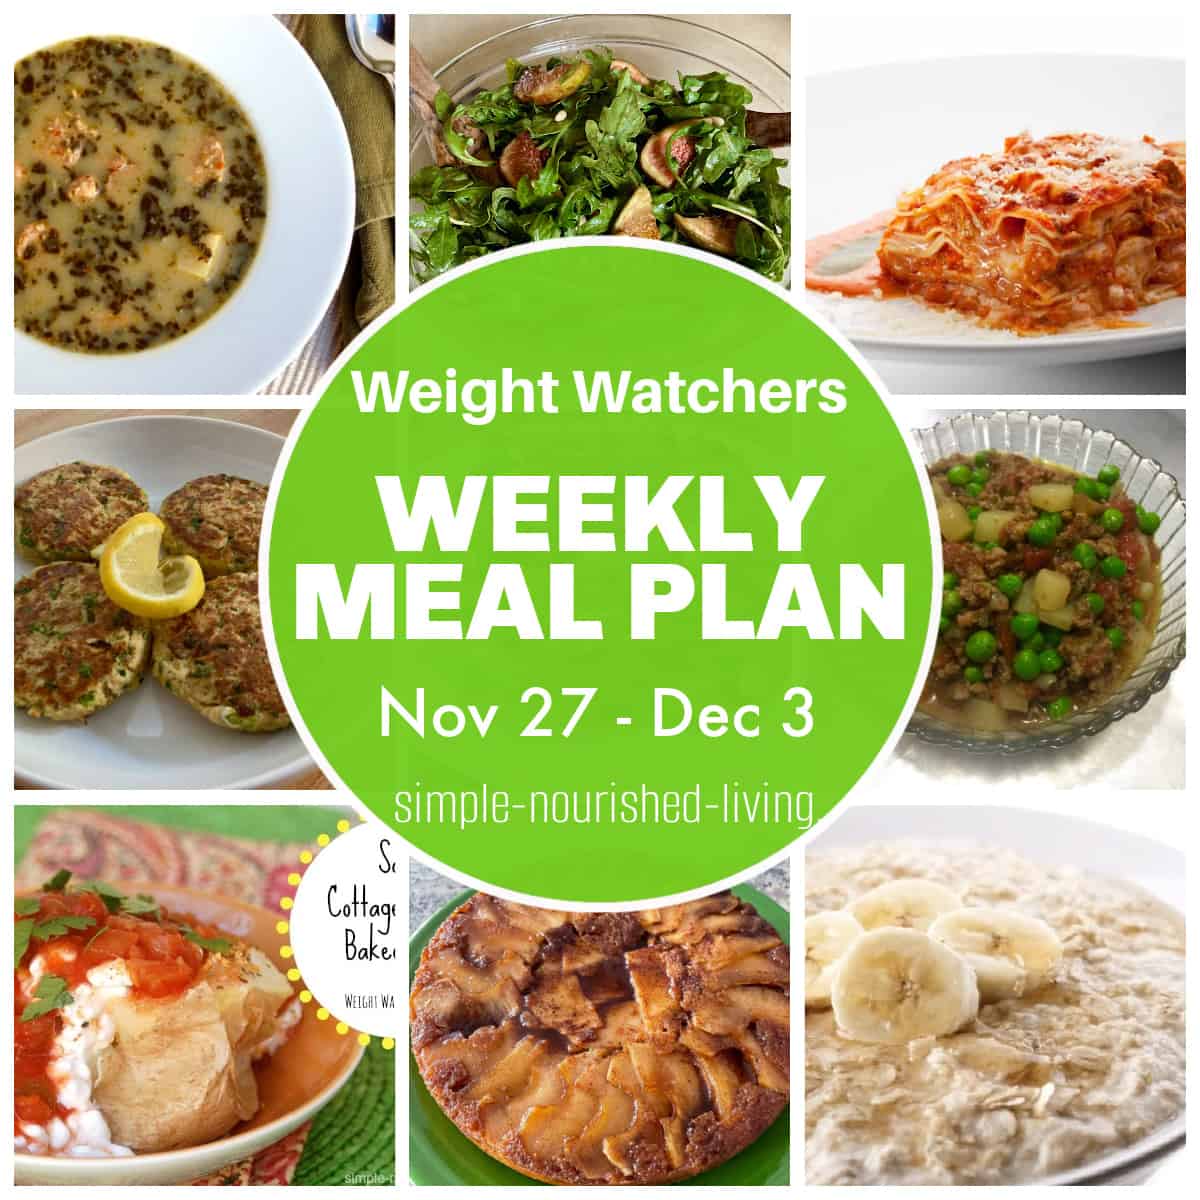 WW Green, Blue or Purple? Find the Best Weight Watchers Plan for You